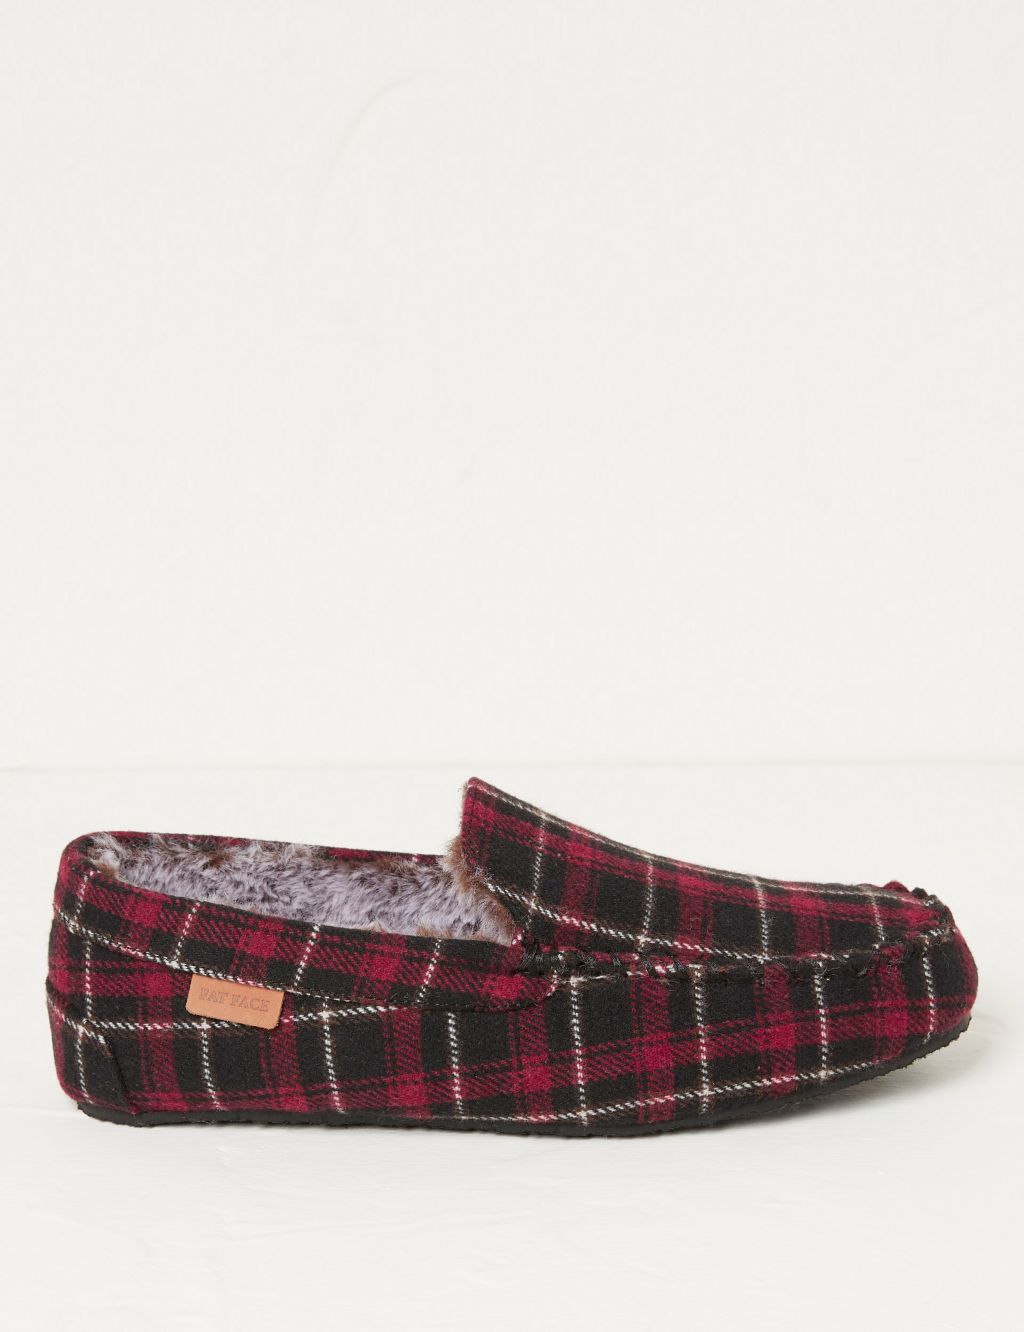 Checked Moccasin Slippers image 1